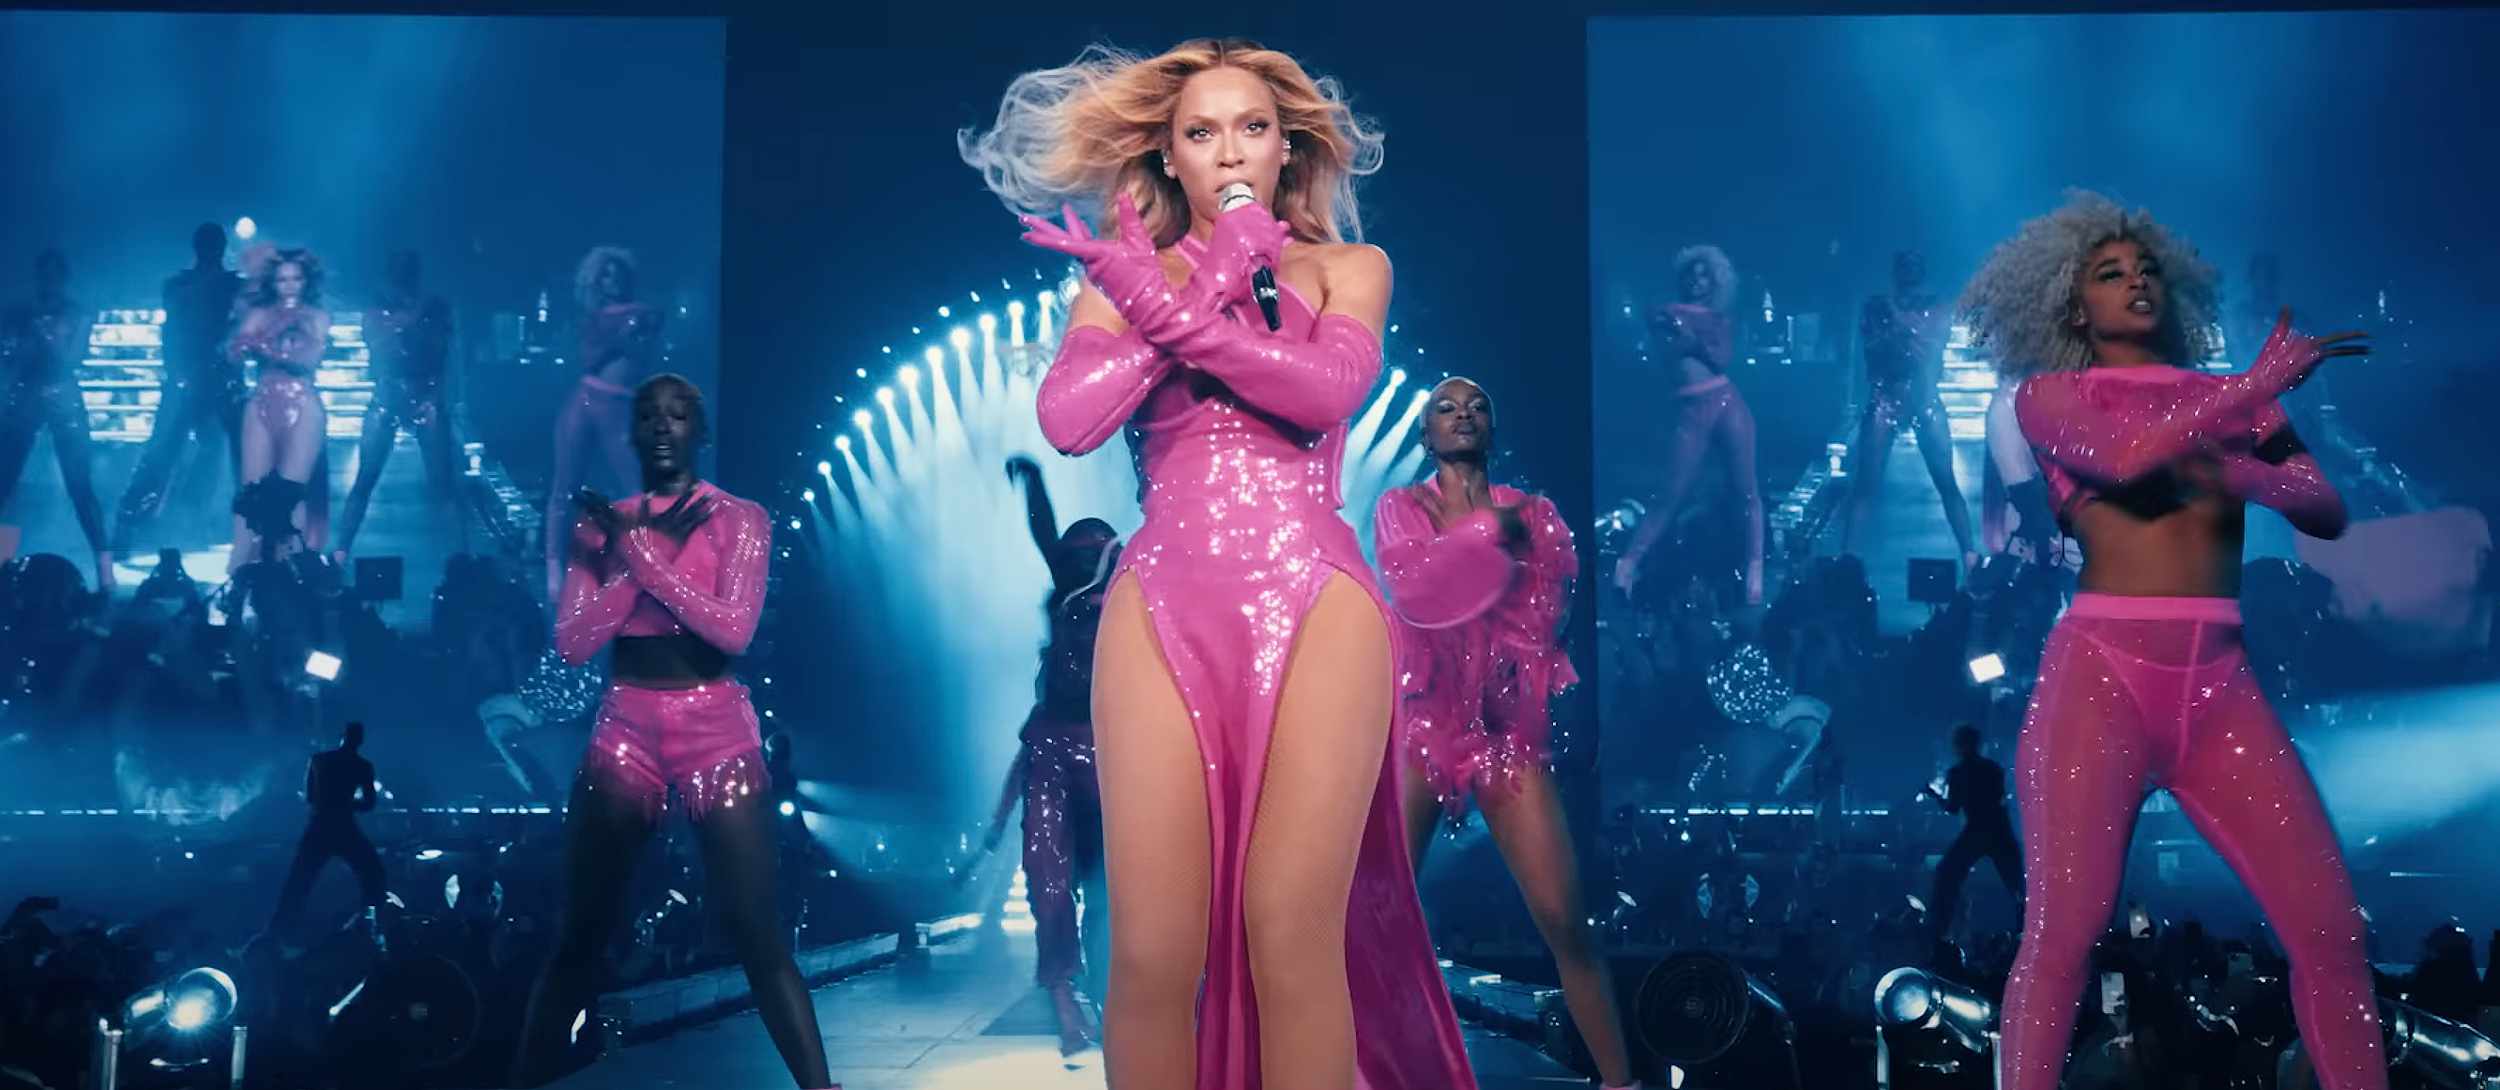 Beyonce Releases New Trailer for the Renaissance Concert Film 